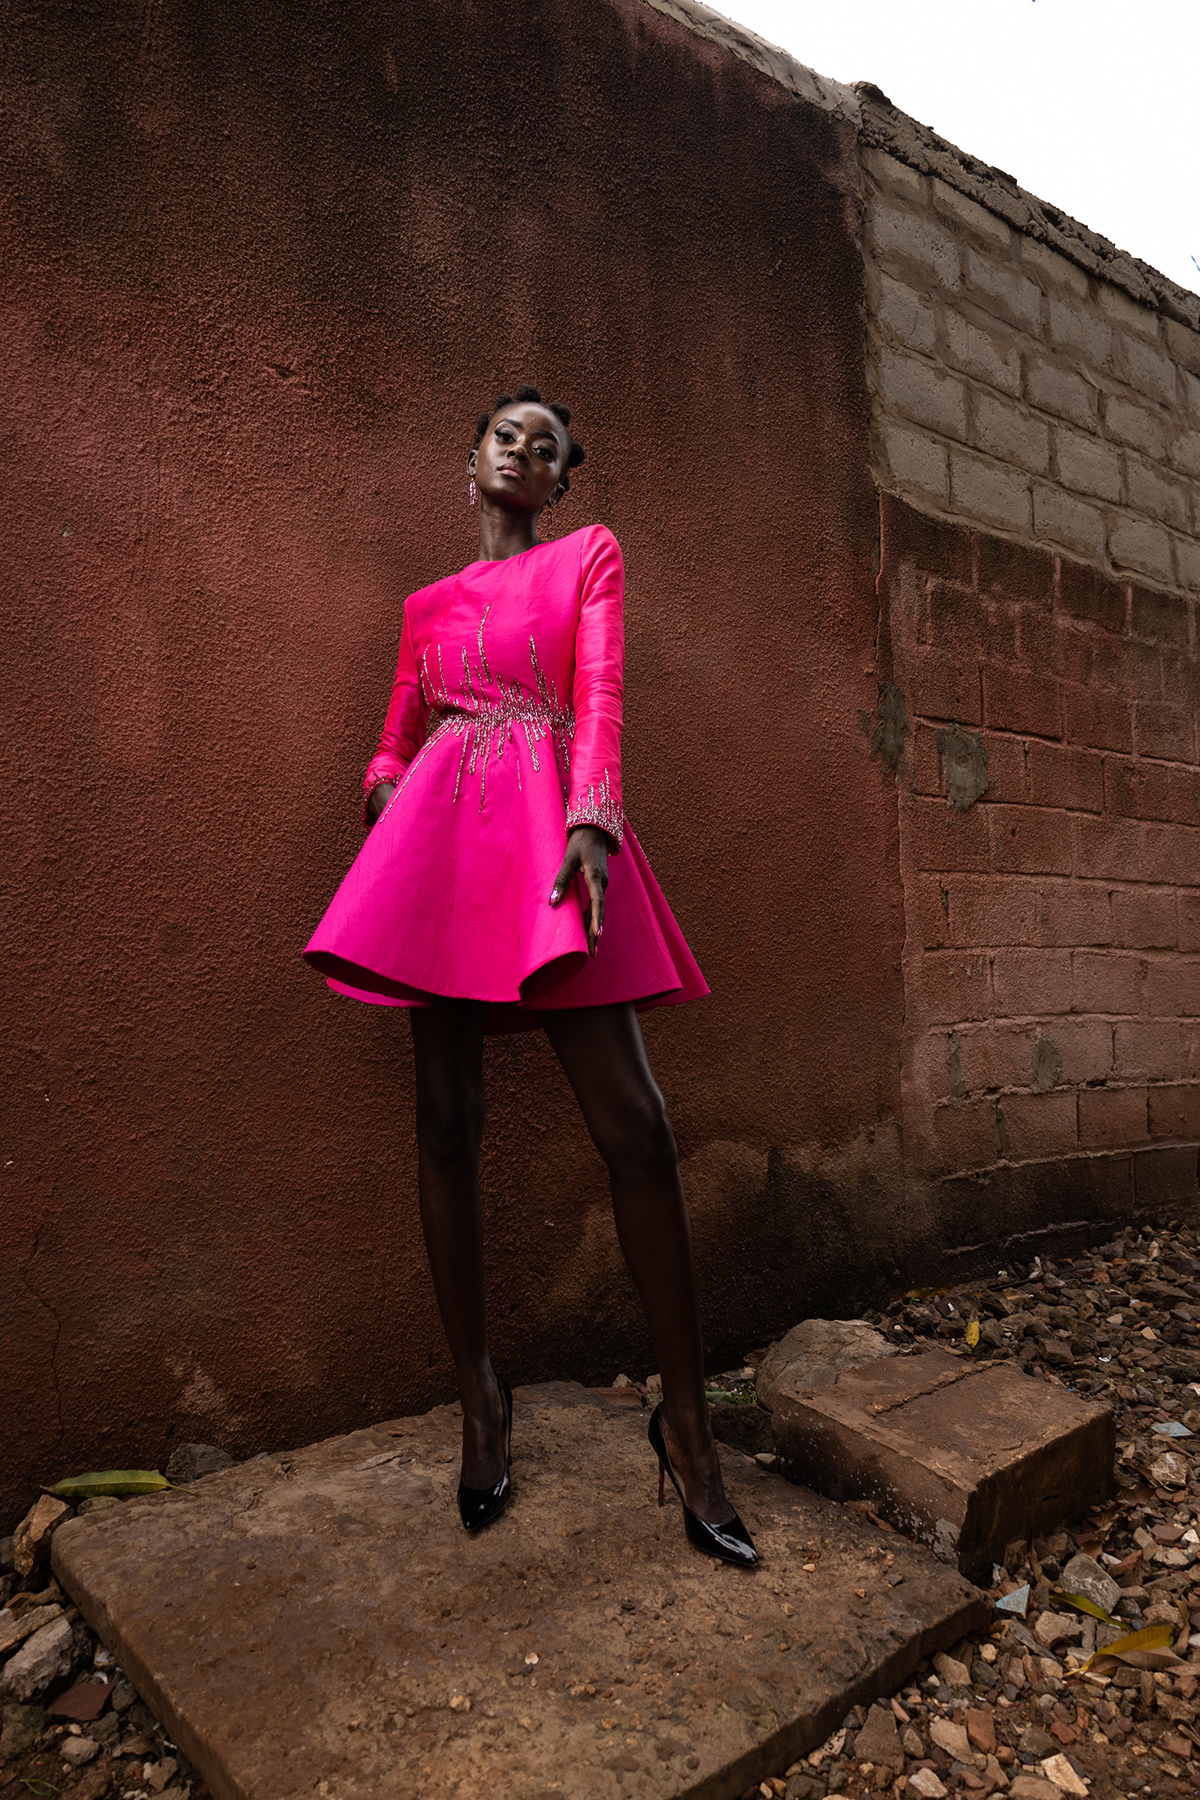 Octobre Rose 2022 - Model from Senegal Bella Penda  - Picture by Khaled Fhemy Mamah - Design carefully crafted by Romzy Studi